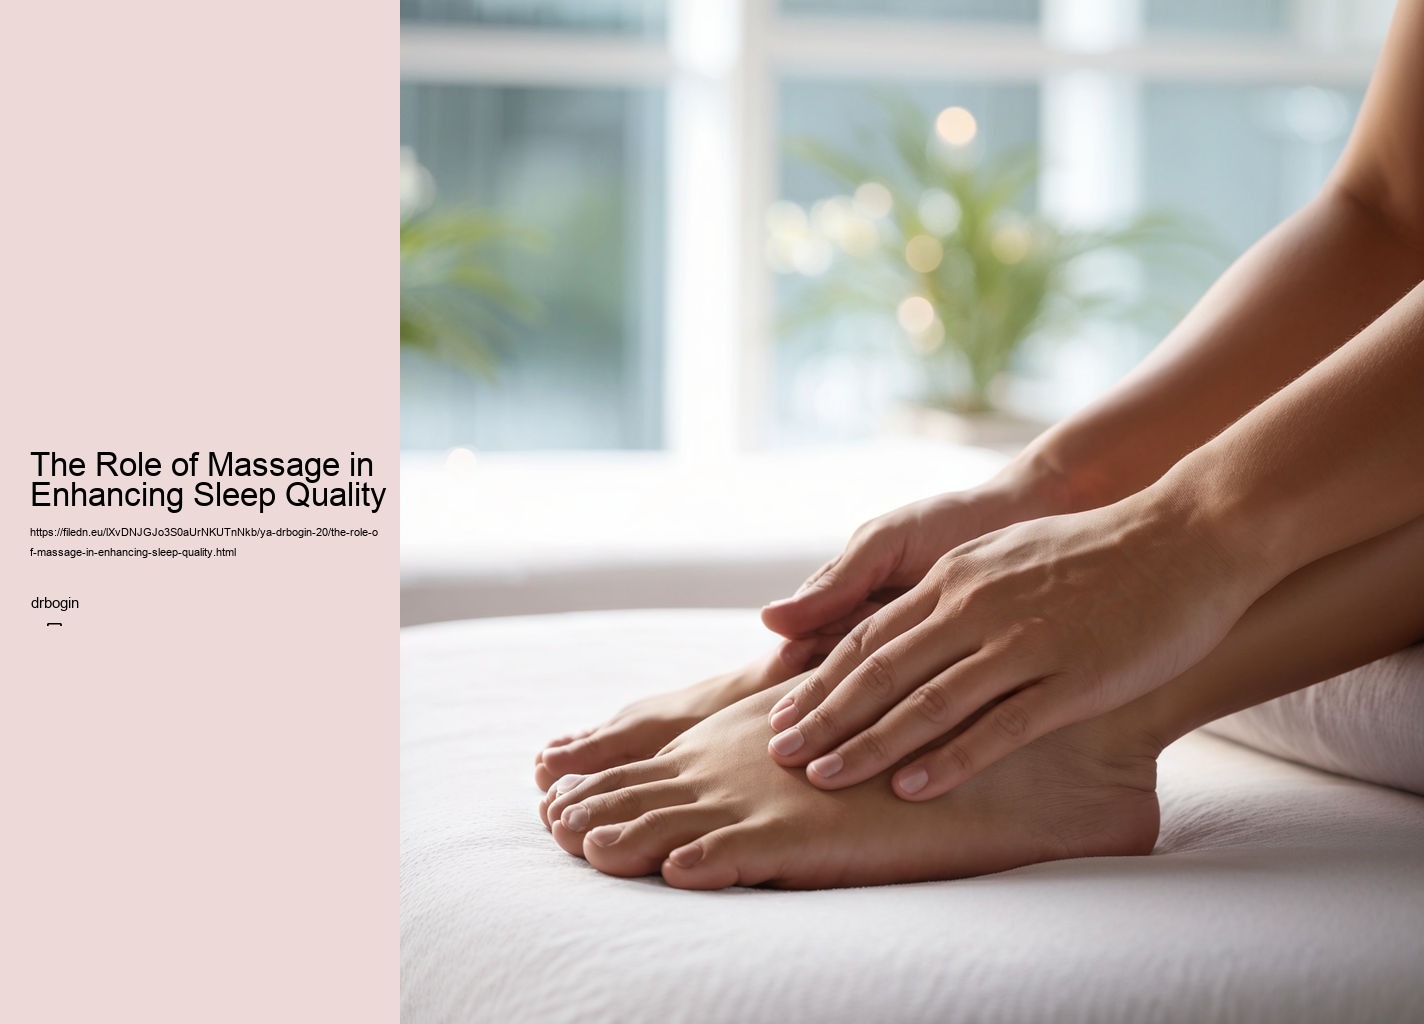 The Role of Massage in Enhancing Sleep Quality